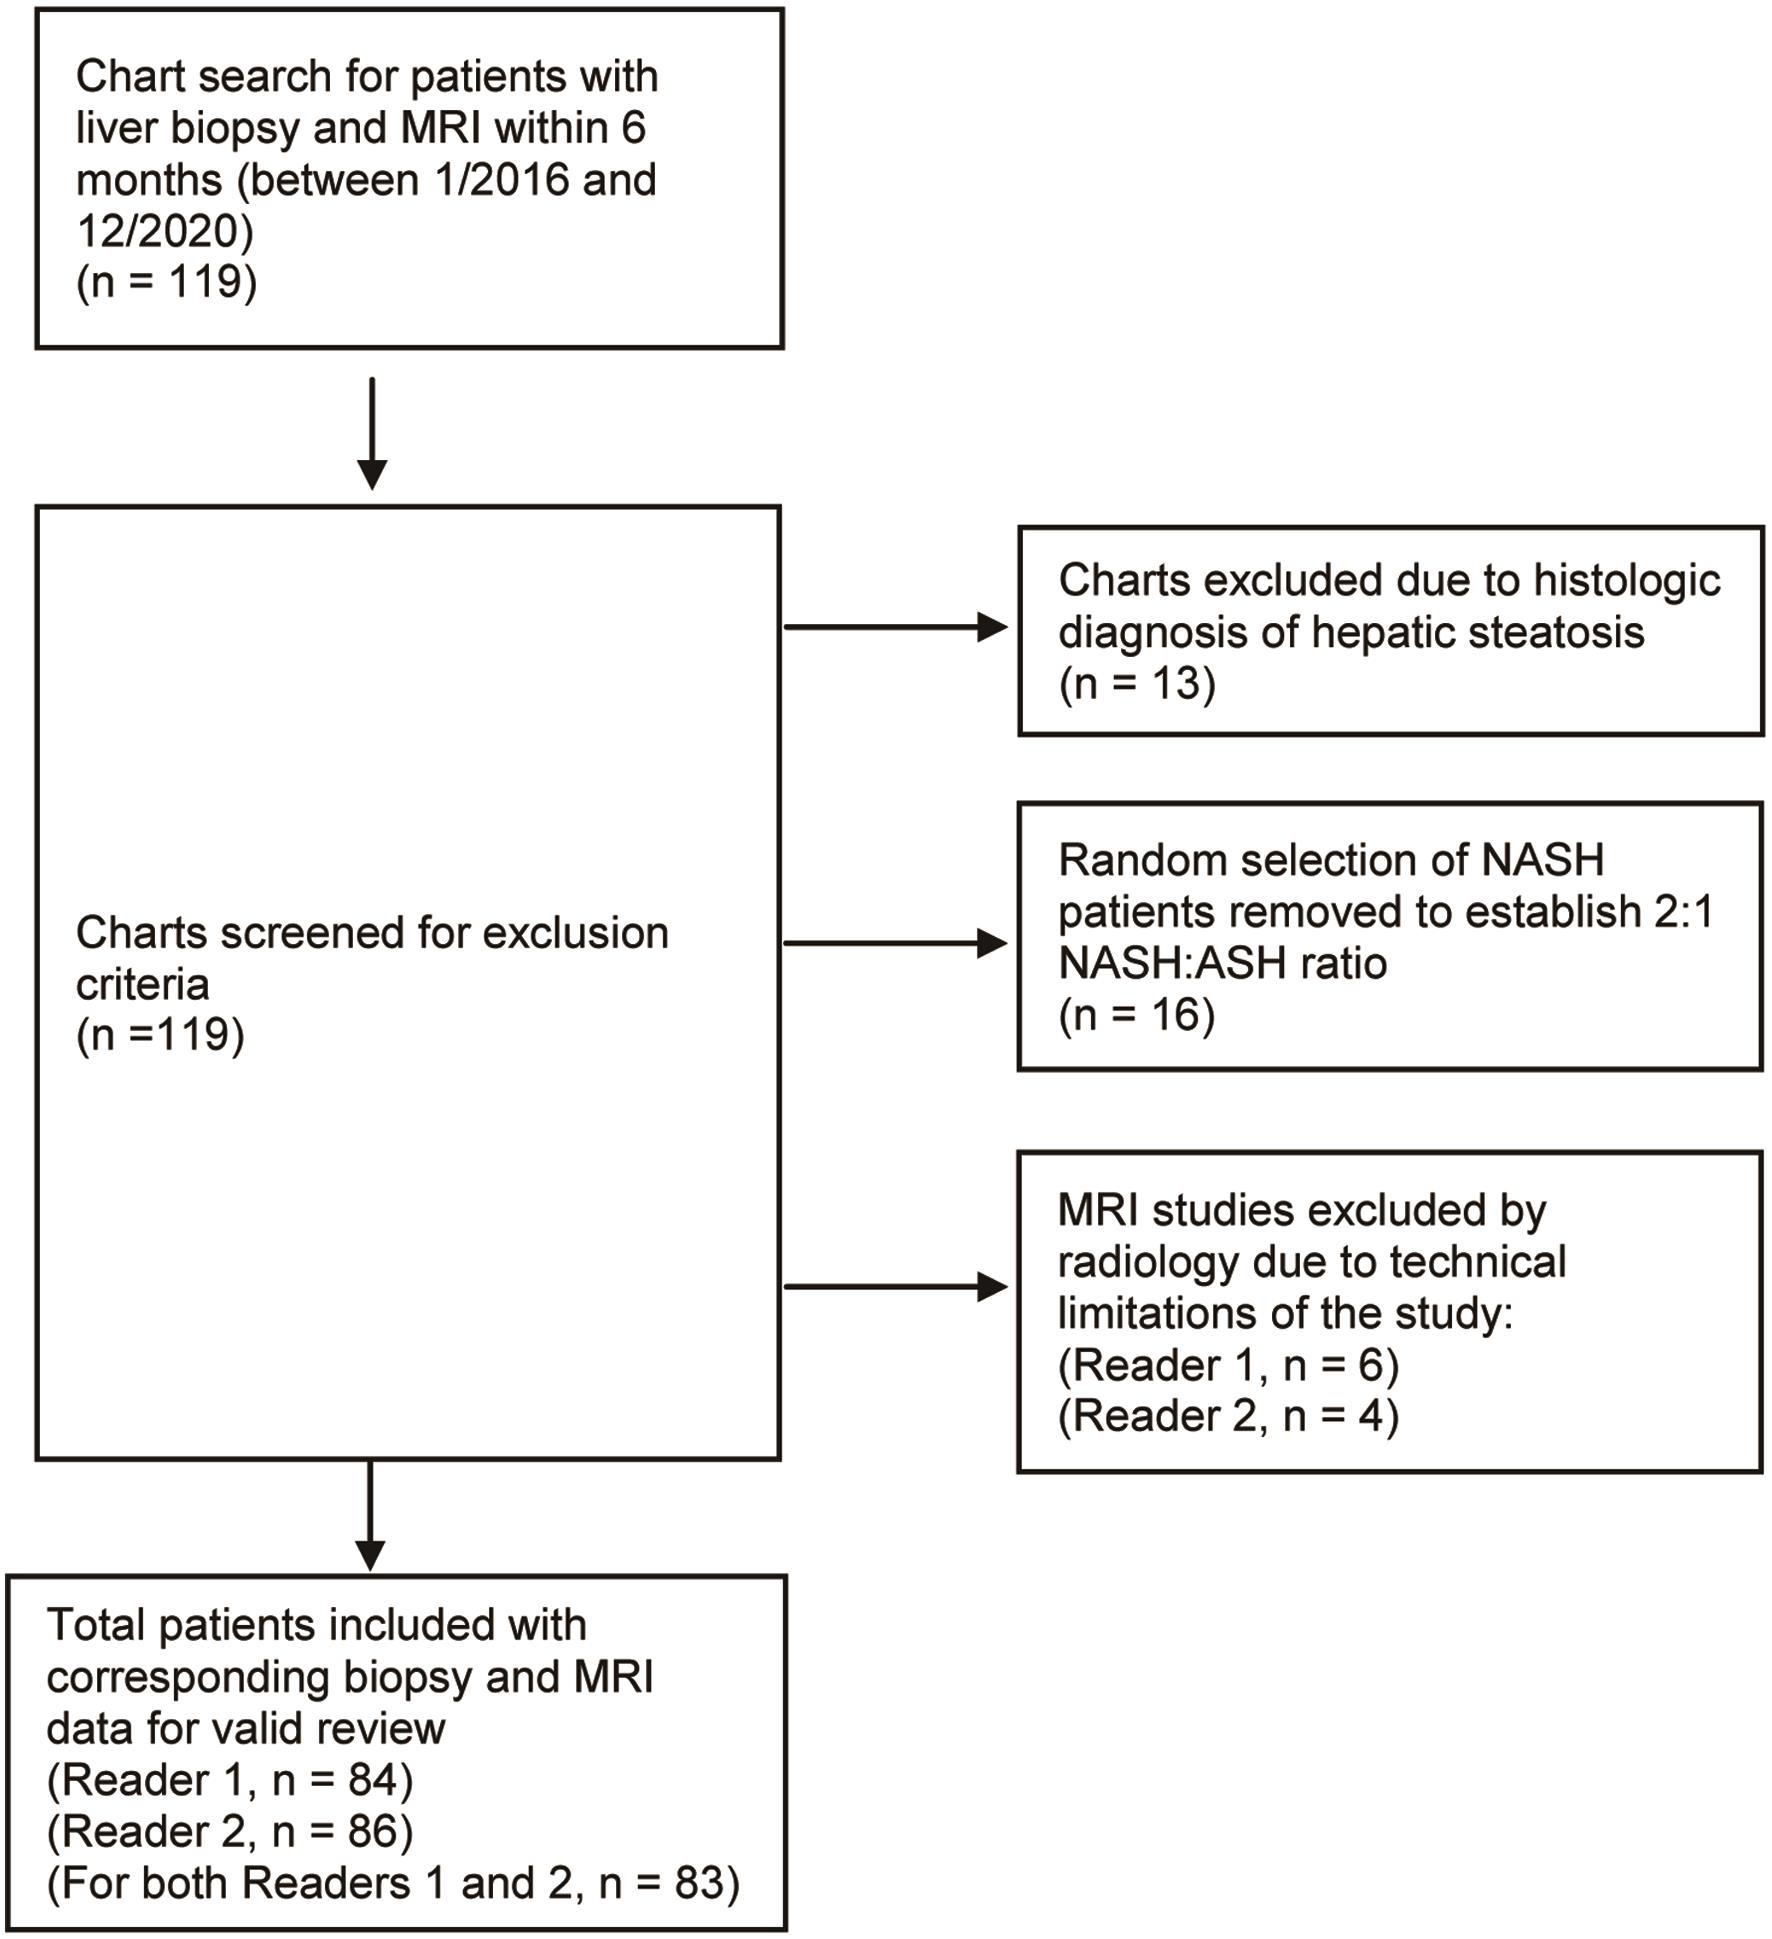 Flowchart of chart review and patient selection for final study analysis.